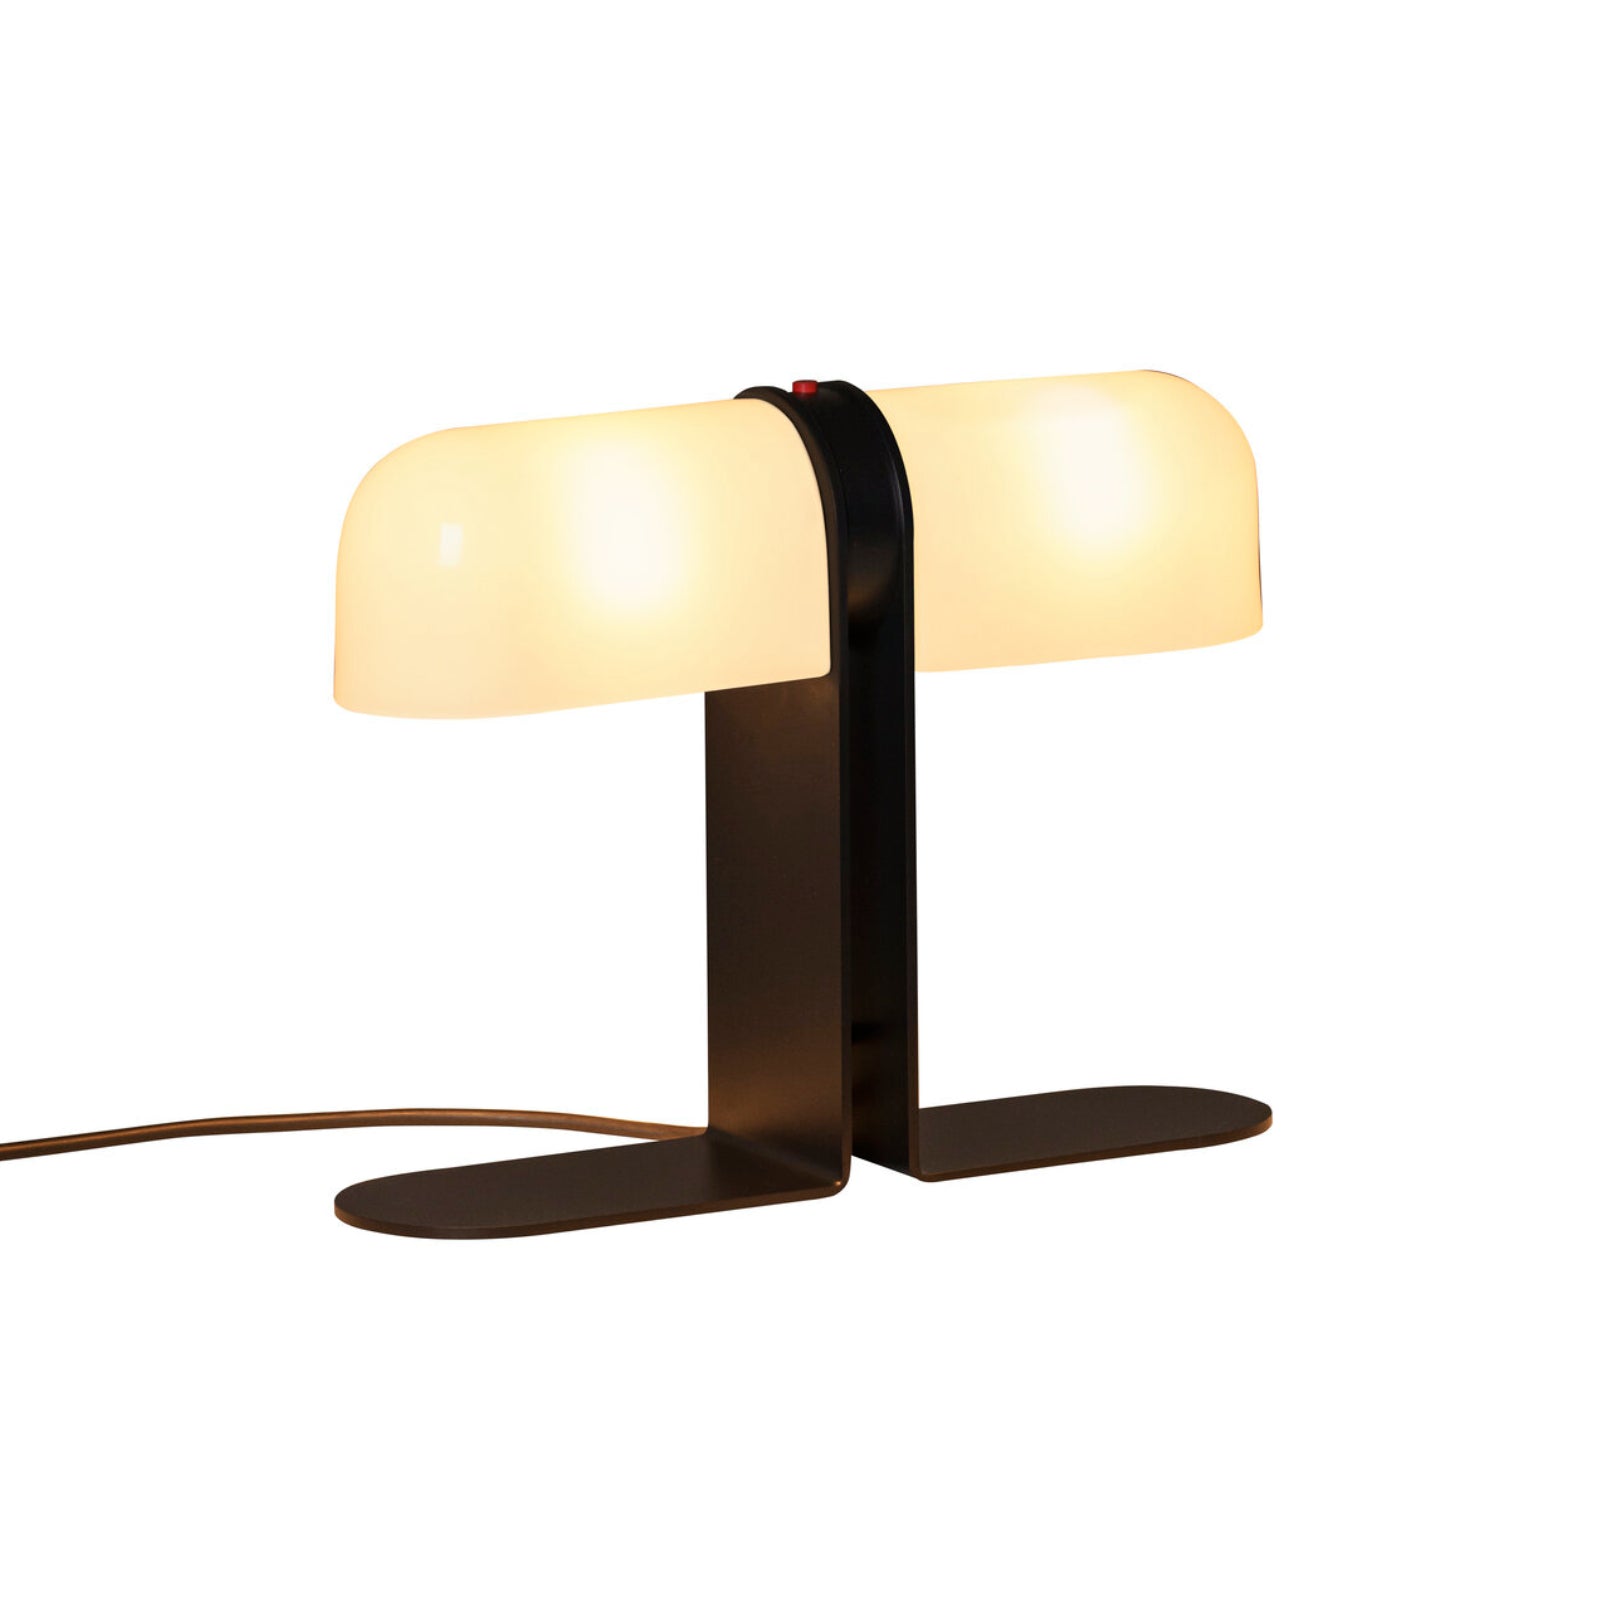 Duo Table Lamp: Translucent white